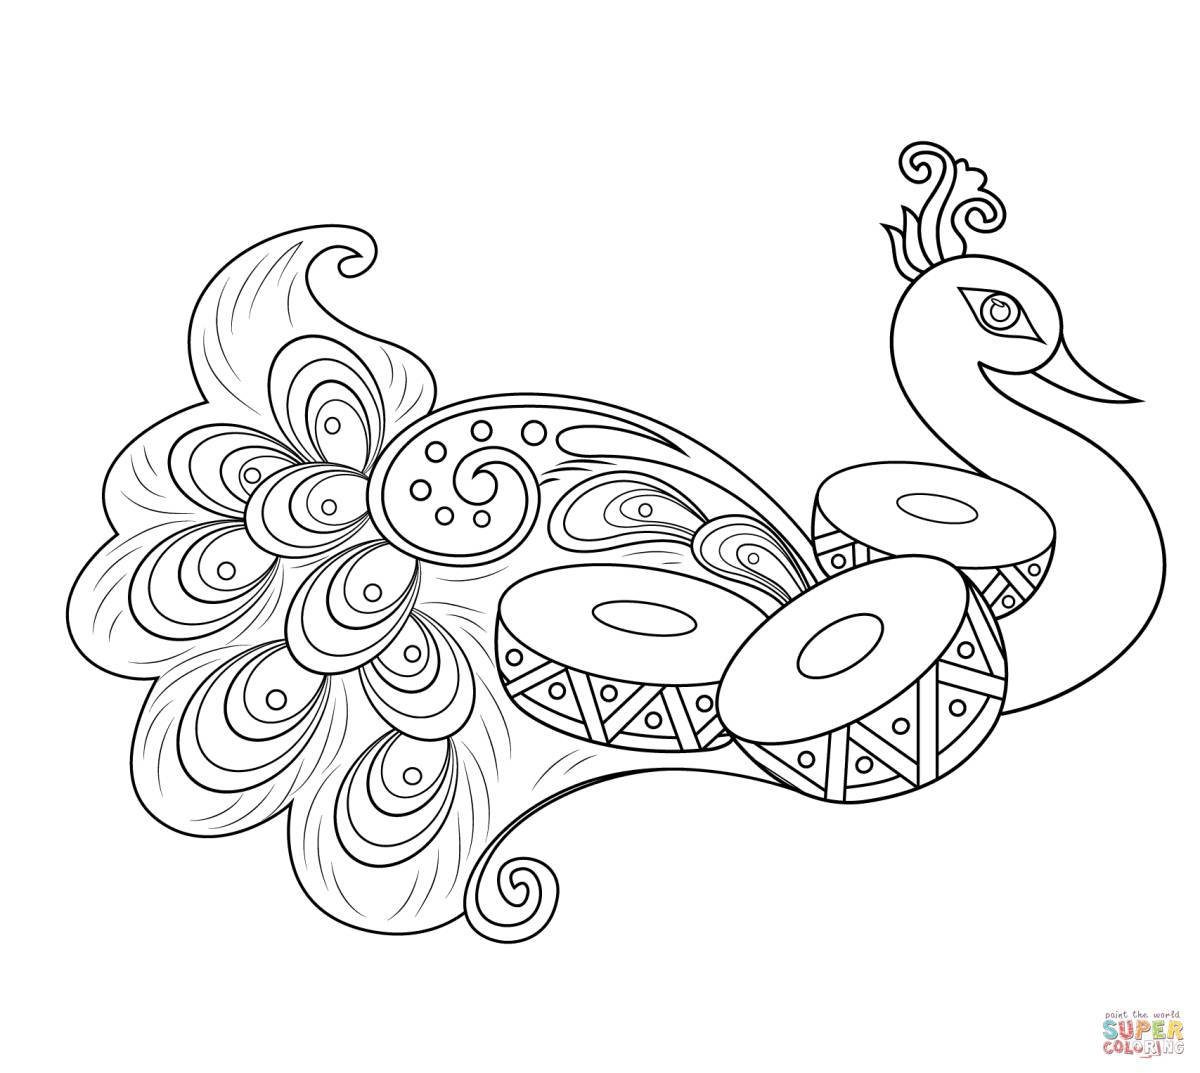 Exquisite firebird coloring book for kids